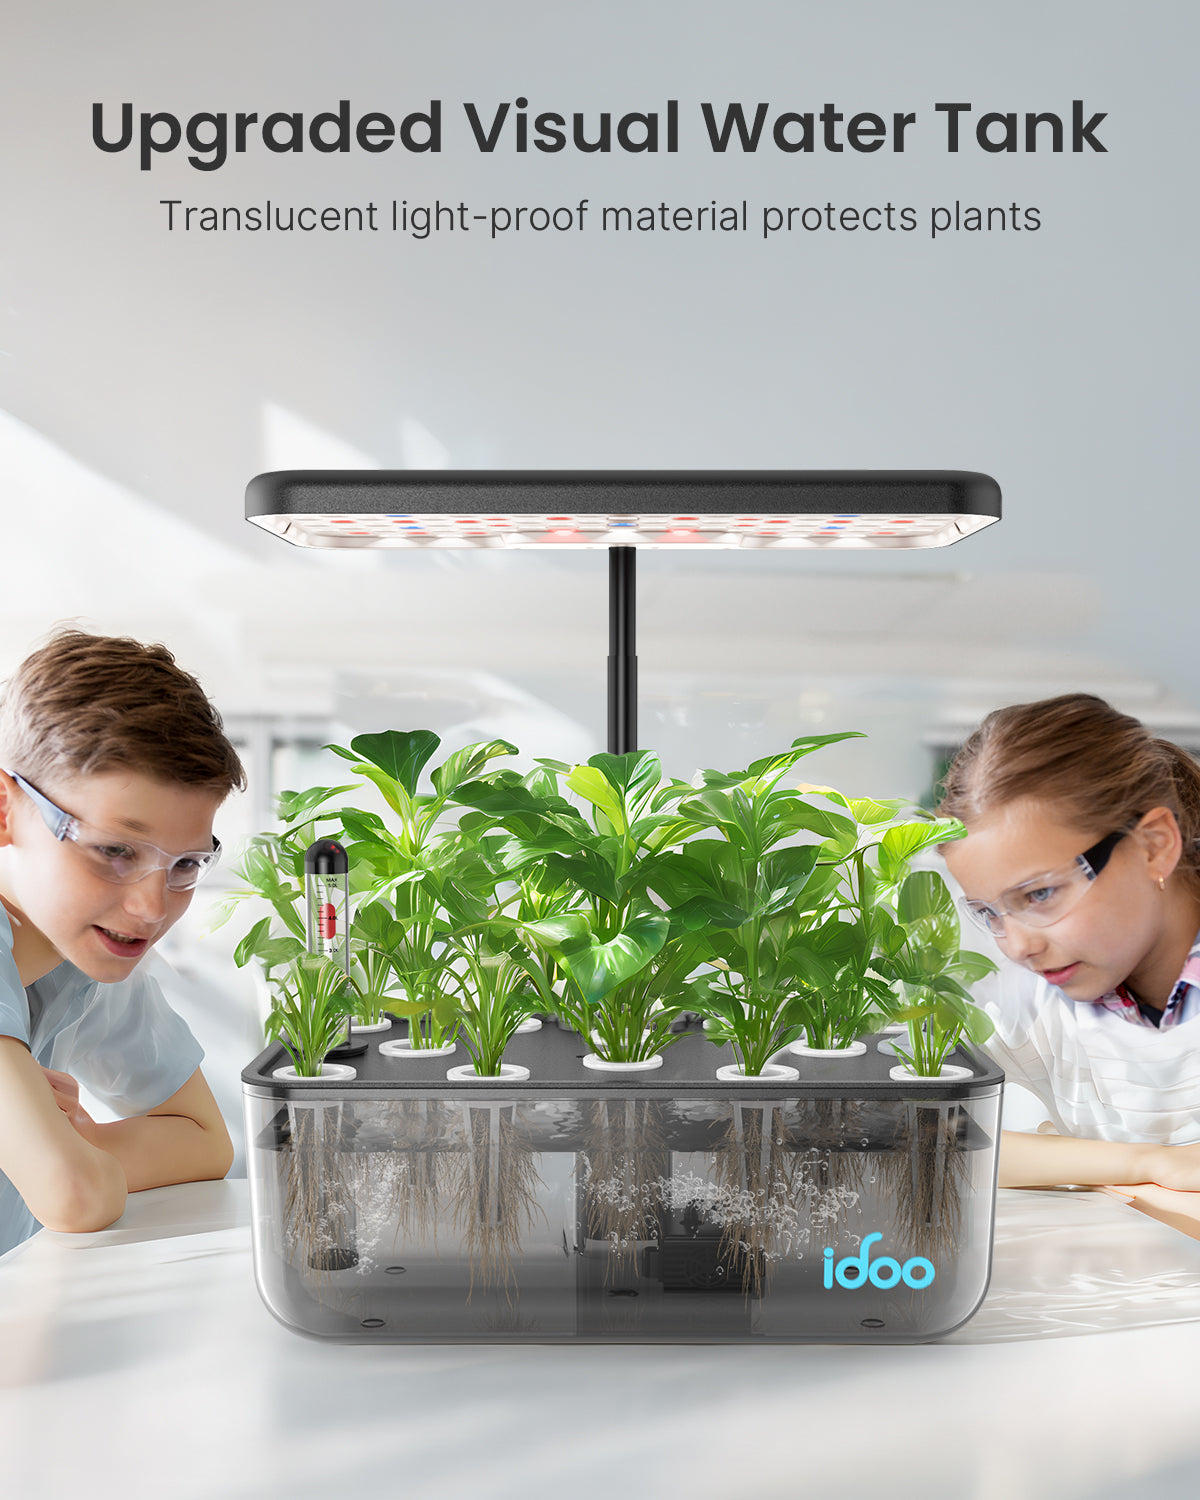 iDOO Hydroponics Growing System Kit, Fathers Gifts Day, 12Pods Herb Garden with LED Grow Light, Indoor Plants Garden Tool for Home Kitchen School, Healthy Food for Vegan, Kids, Good for Mental Health